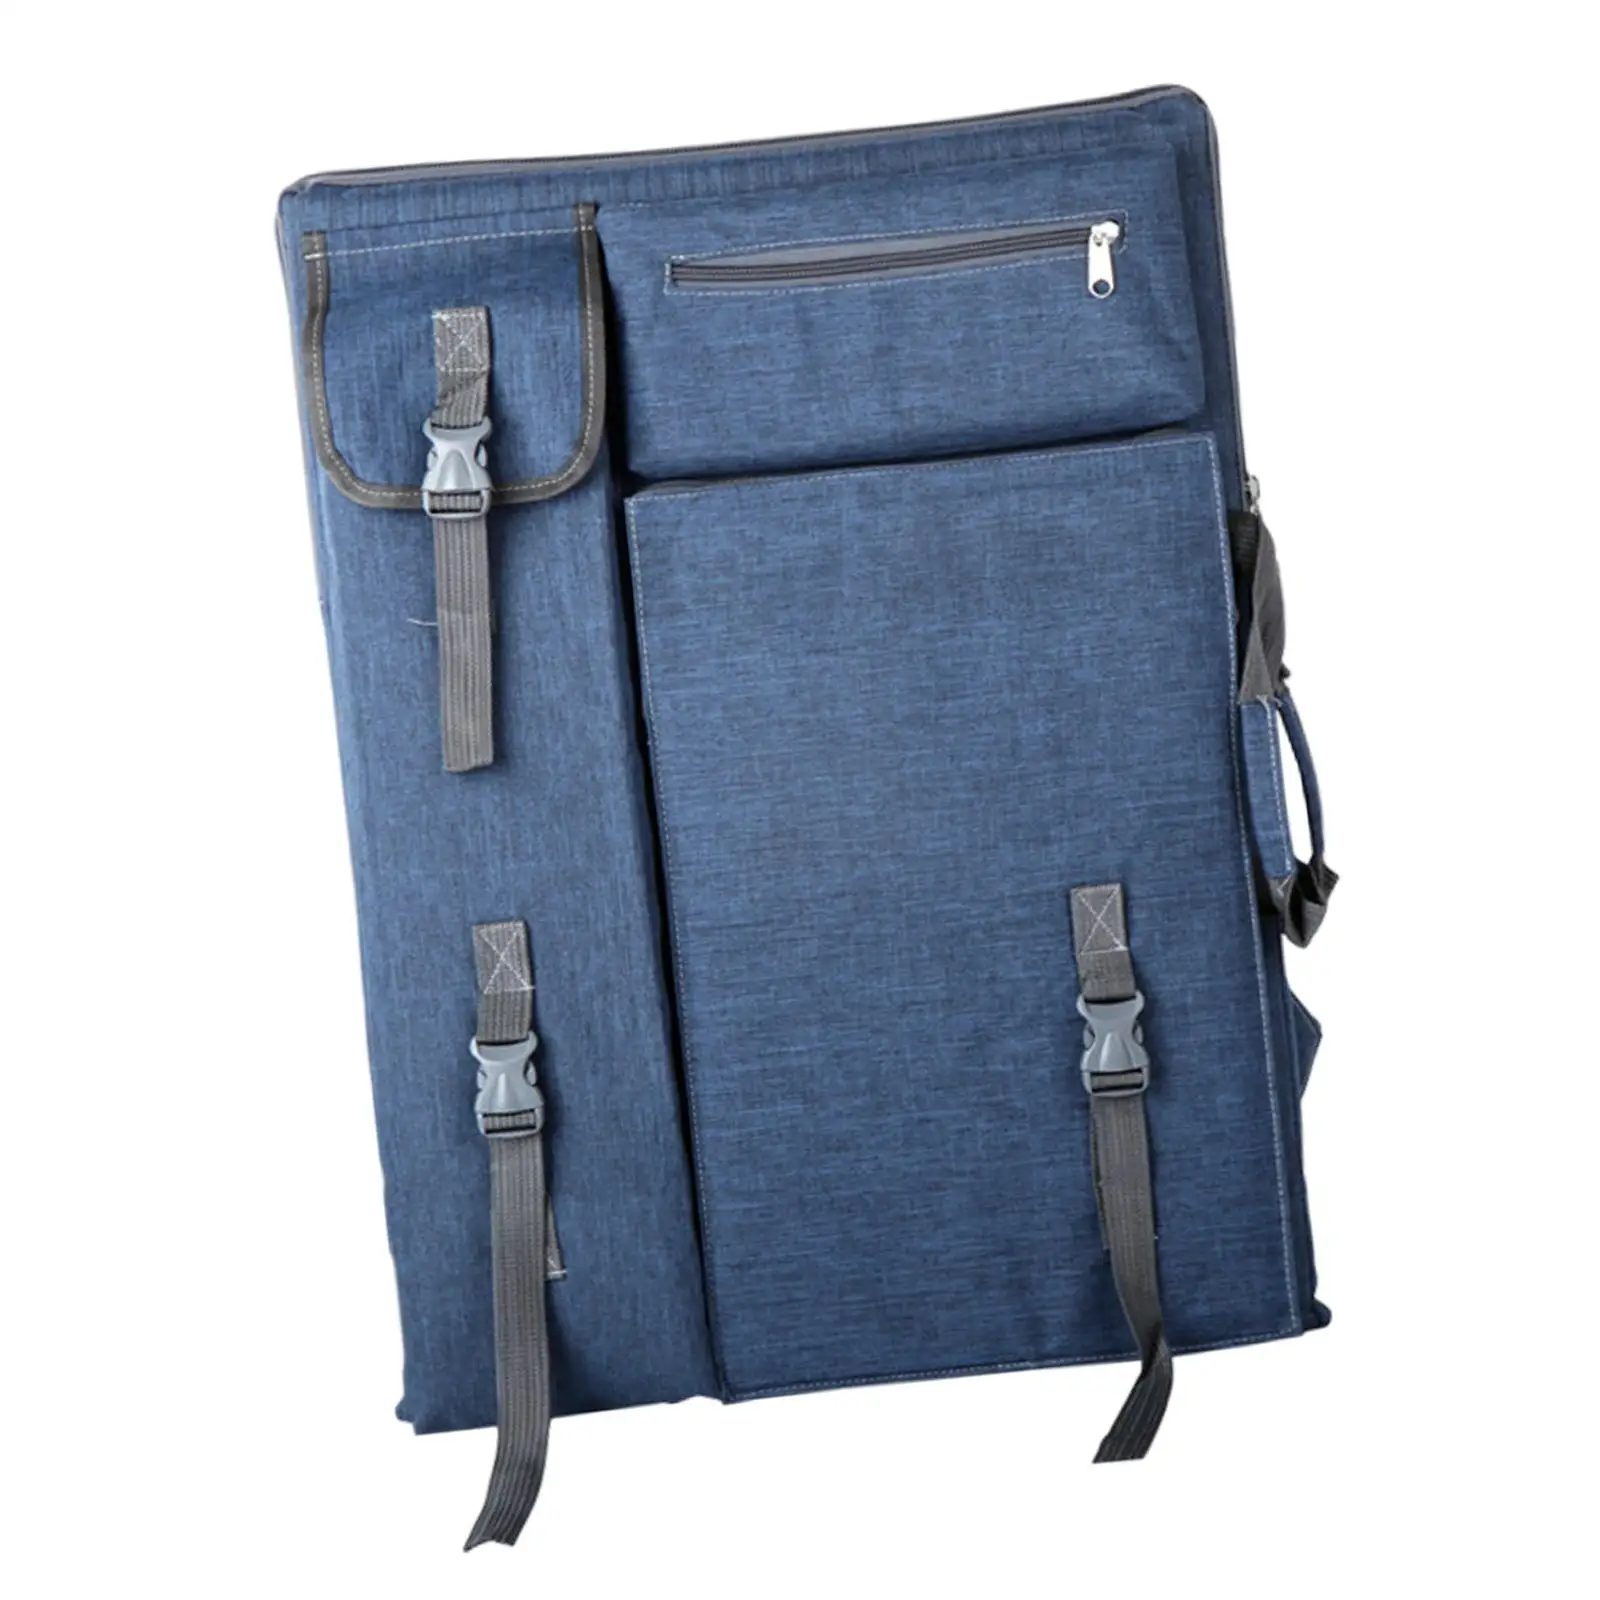 Art Portfolio Case Blue Durable Wear Resistant Lightweight Practical Painting Brushes 4K Canvas Drawing Board Bag Drawing Bag